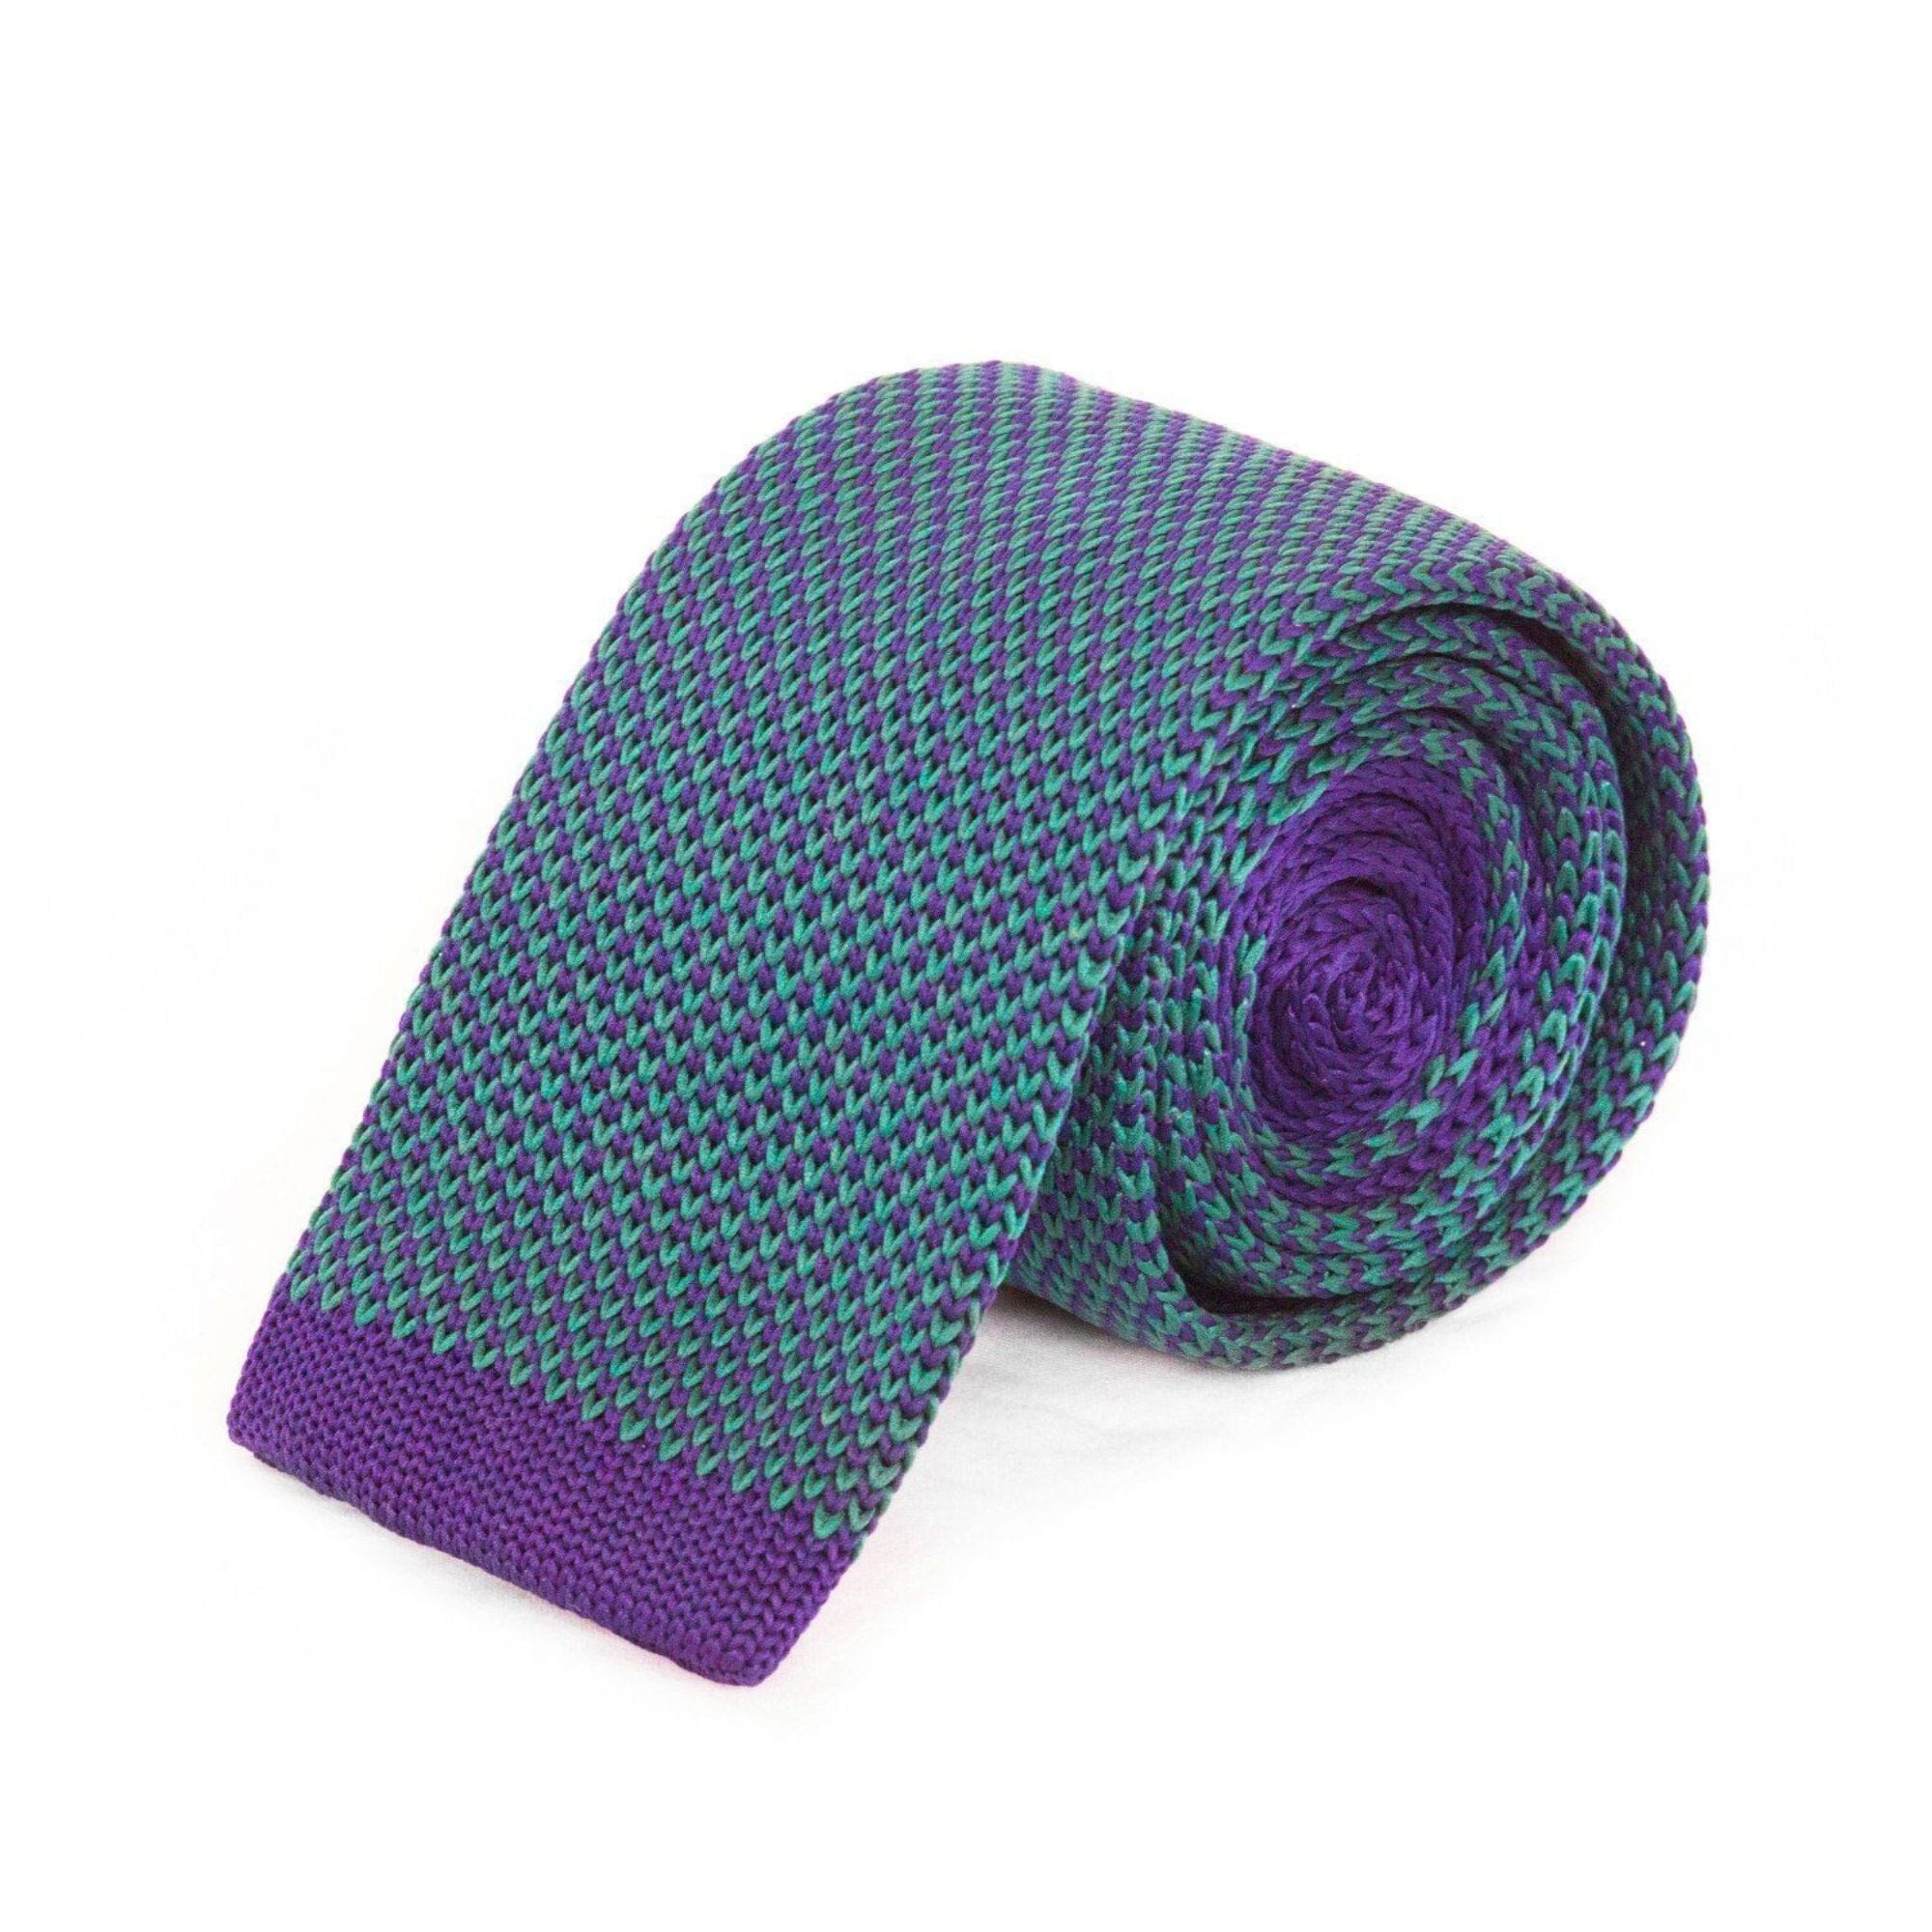 Green and Navy Weave Knitted Tie Ties Cuffed.com.au 